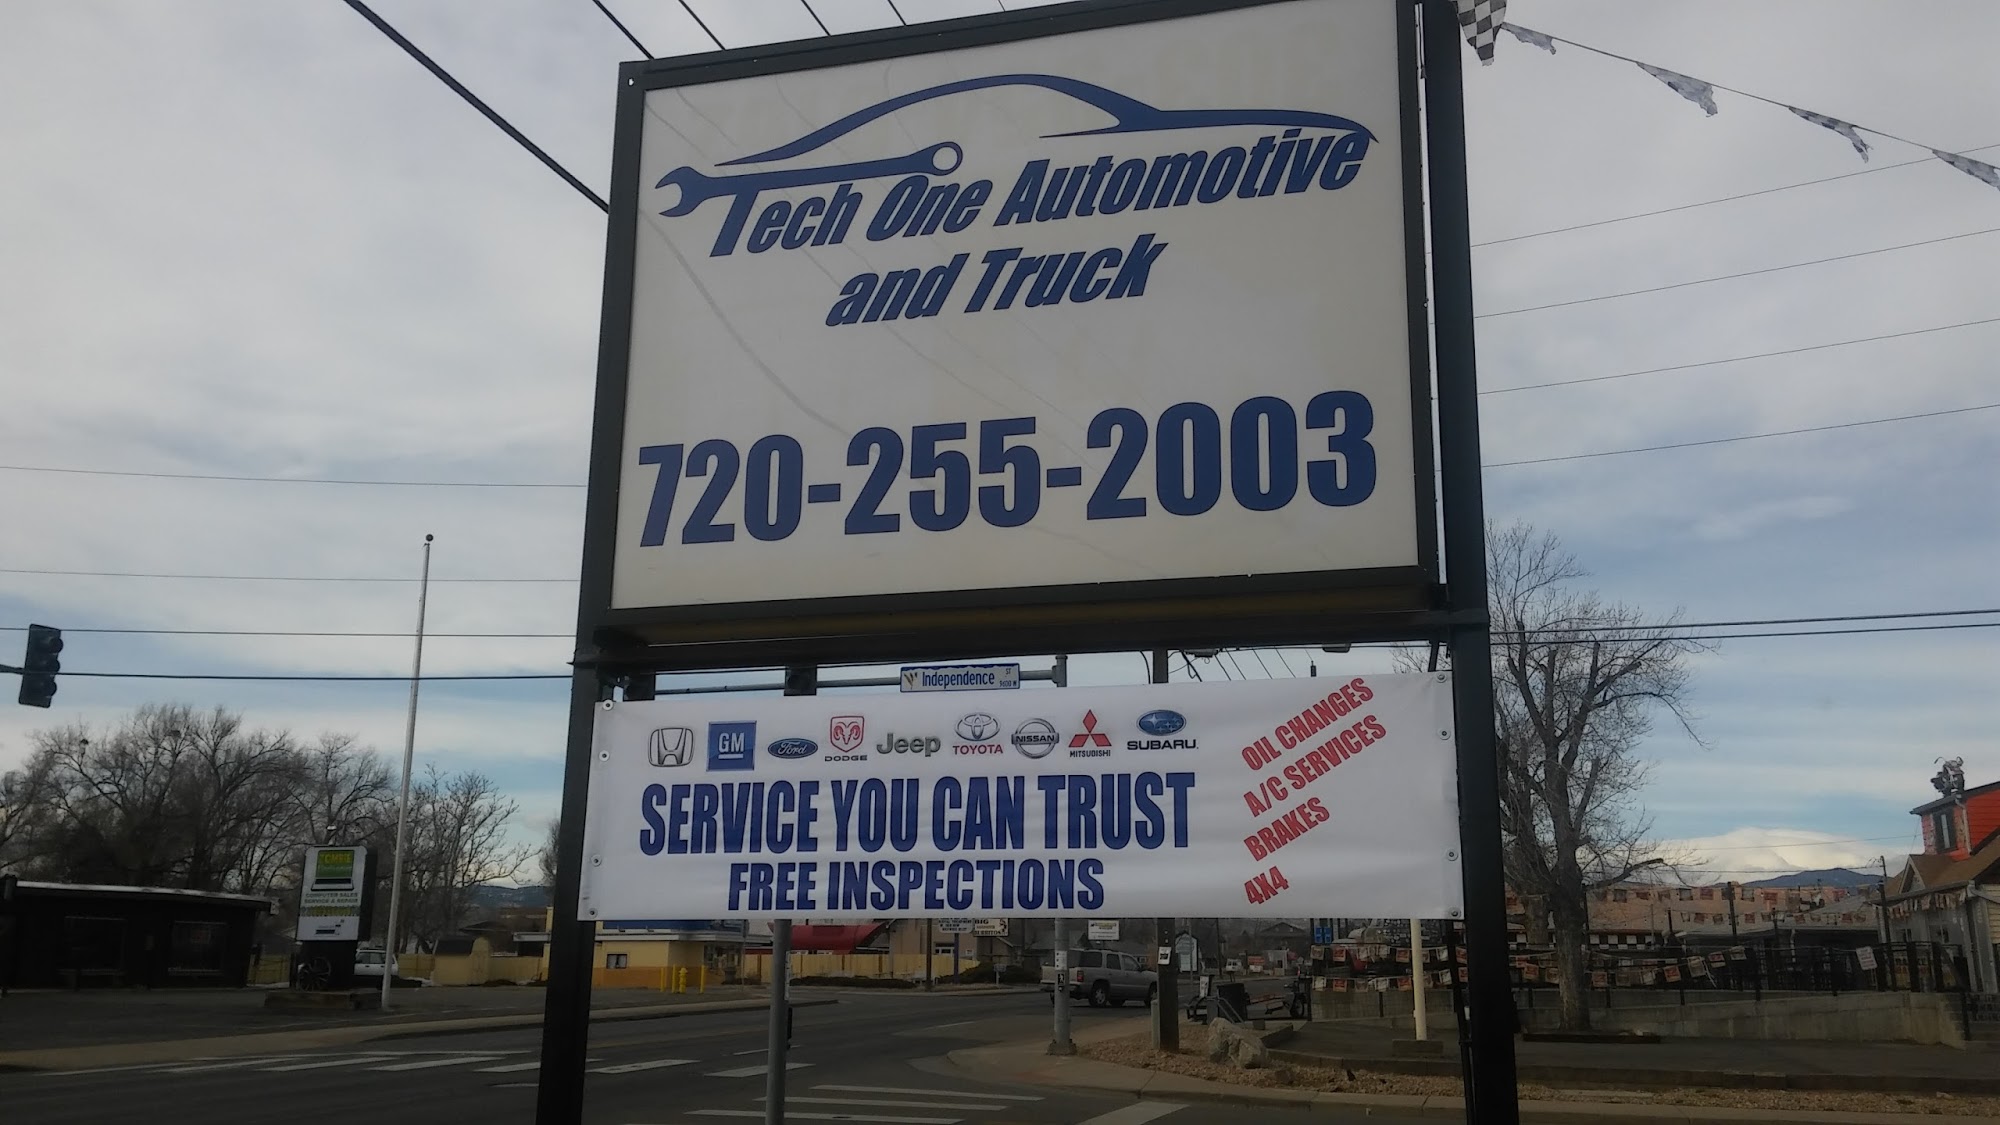 Tech One Automotive and Truck